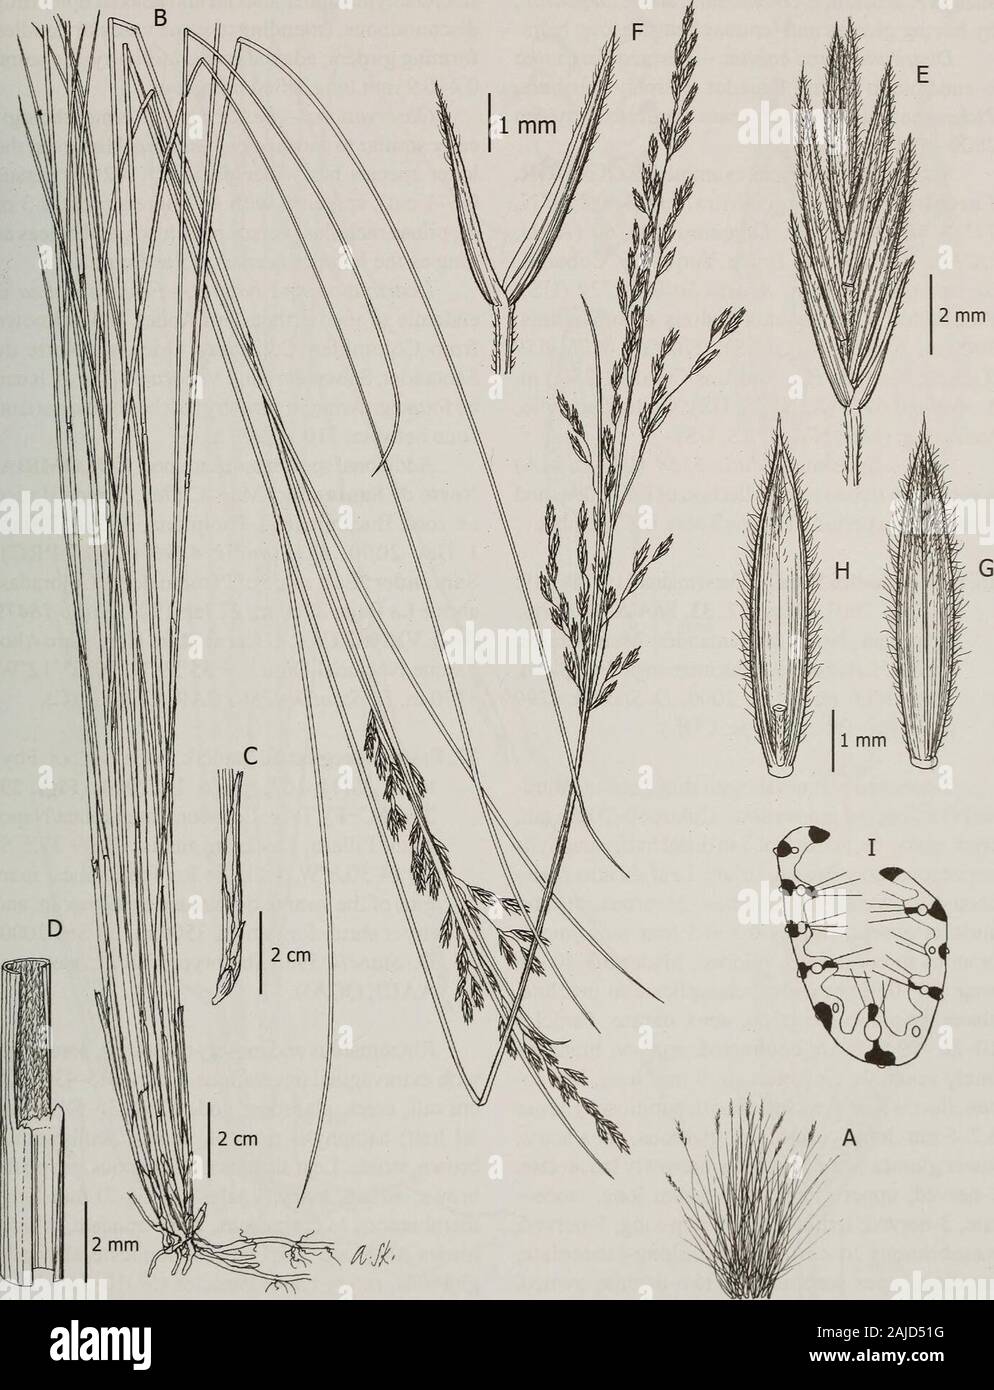 Contributions from the United States National Herbarium . or sparsely scabrous.Spikelets 10-11 mm long, florets 4 or 5; rachilladensely pilose; glumes 3-5 mm long, lanceolate,membranous to coriaceous, green, distal 1/3often densely hirsute, apex acute; lower glumes3-3.5 mm long, 1-nerved; upper glumes 4.5-5 mmlong, prominently 3-nerved; lemmas 5.5-6 mmlong, lanceolate, 5-nerved, membranous, green,densely hairy, apex entire, acute or short-awned, theawn, up to 1 mm long; paleas as long as the lemma,glabrous, upper 1/3 hirsute; lodicules lanceolate,acuminate; anthers 2.3-3.3 mm long; ovary apexg Stock Photo